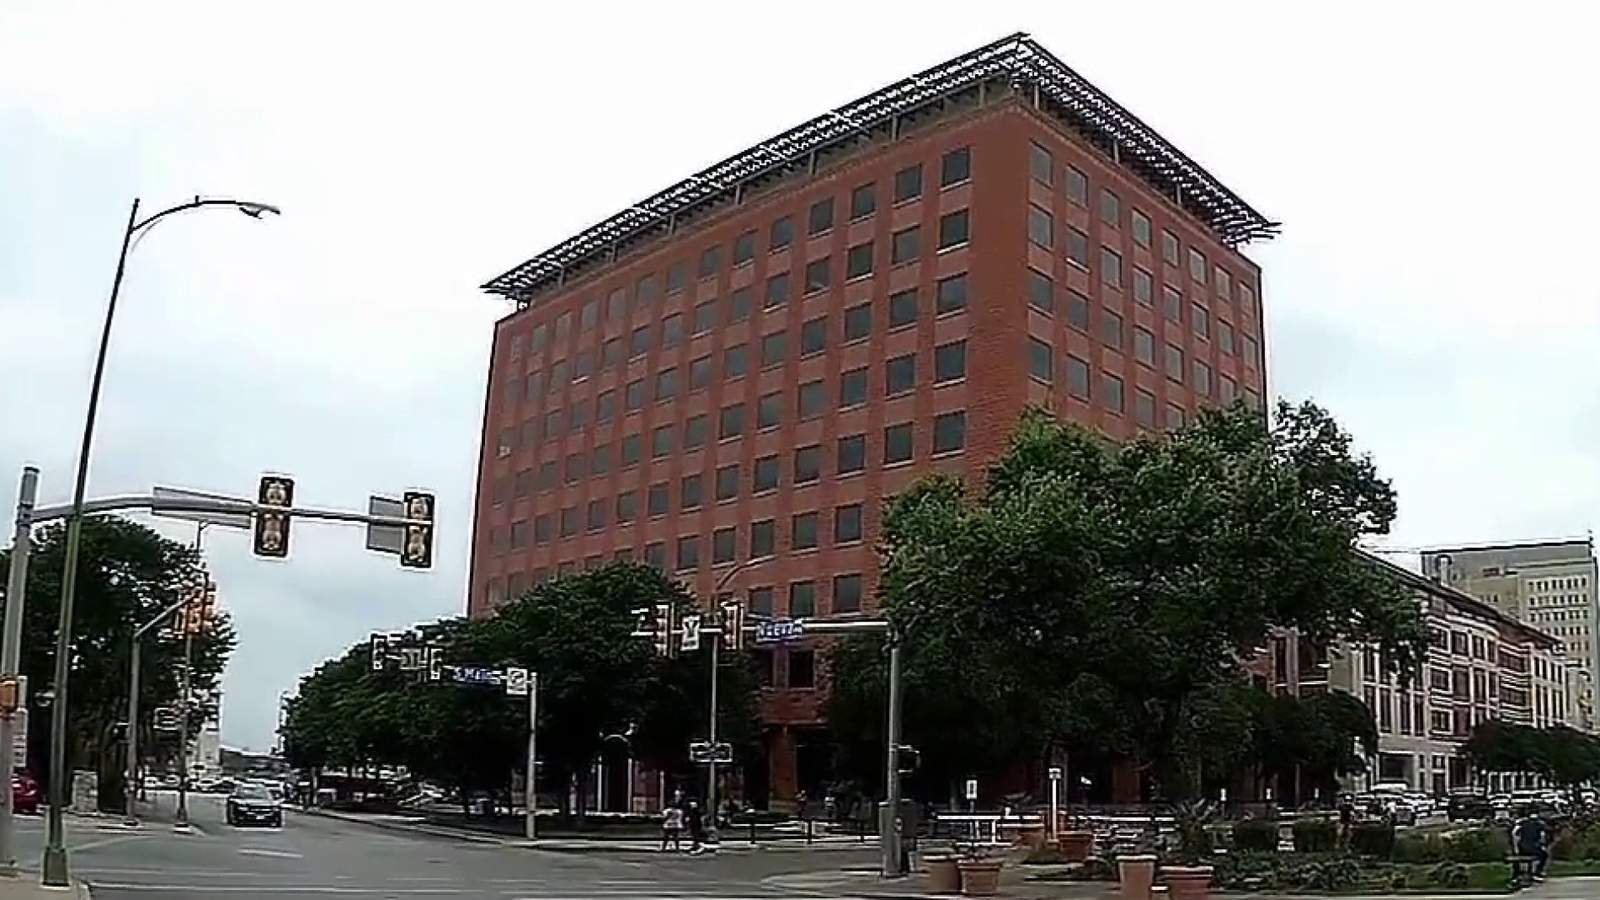 Bexar County Family Justice Center faces new challenges in pandemic